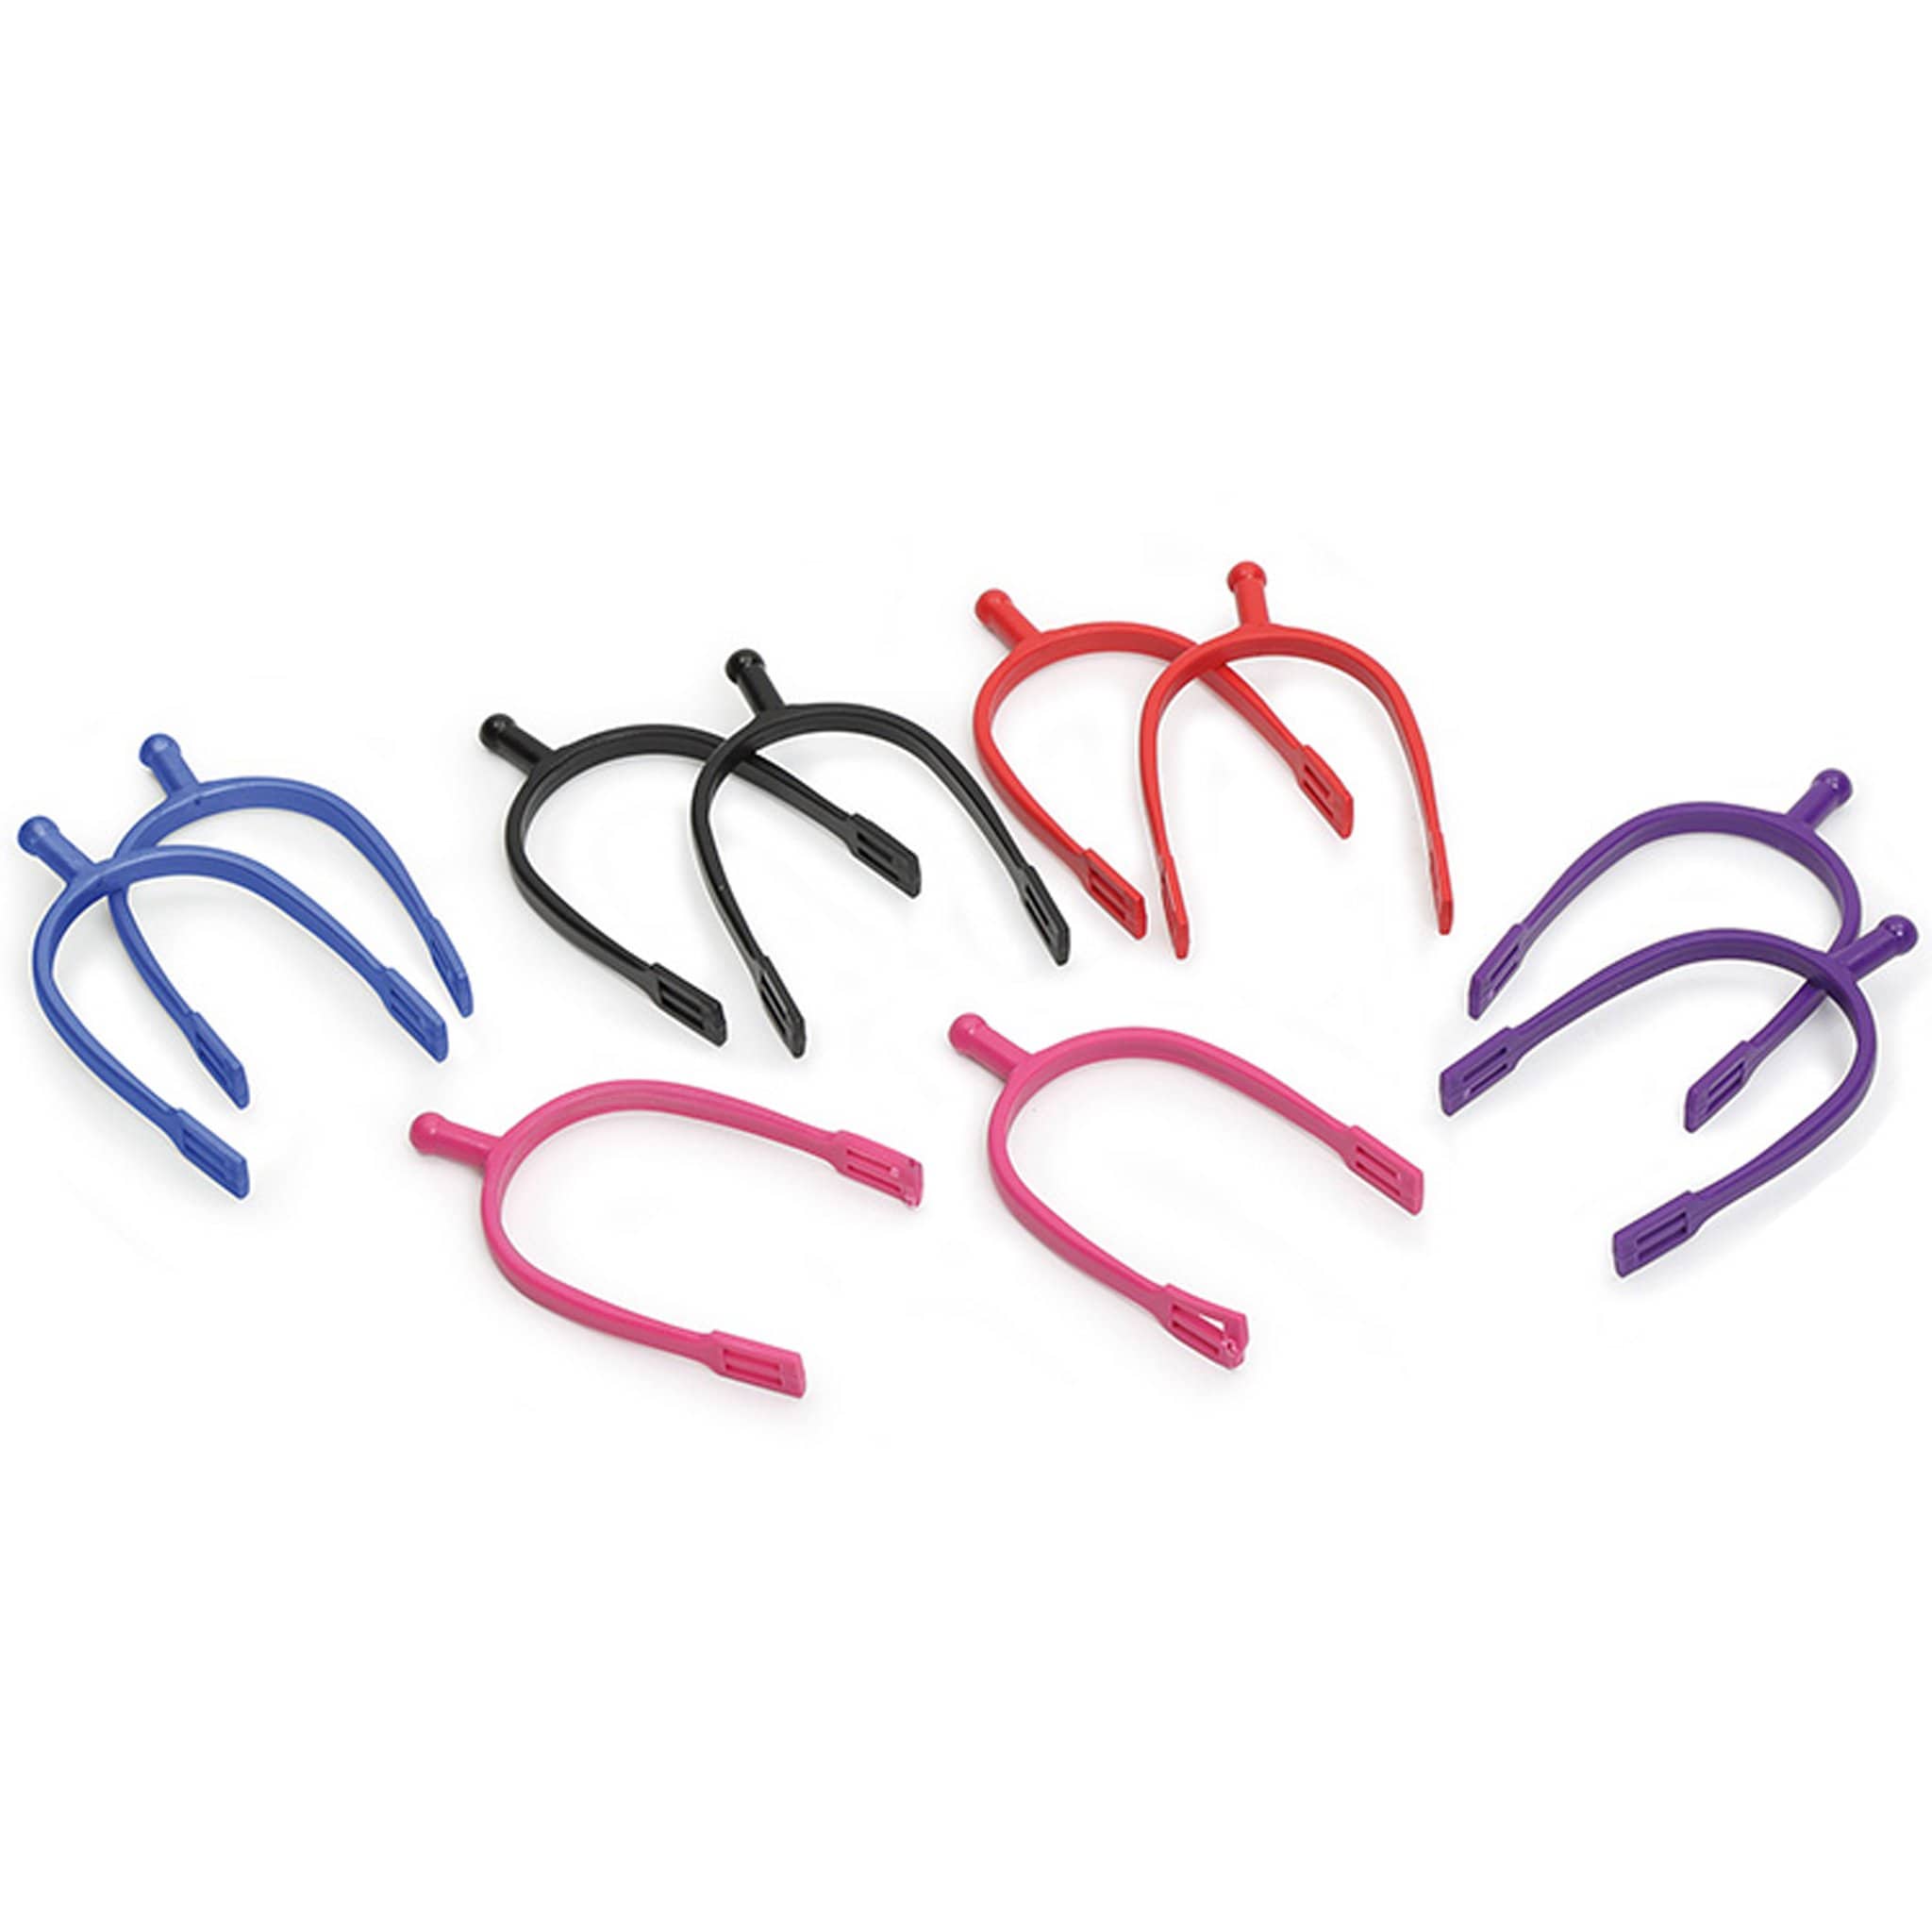 Shires Plastic Ball End Spurs - Pink